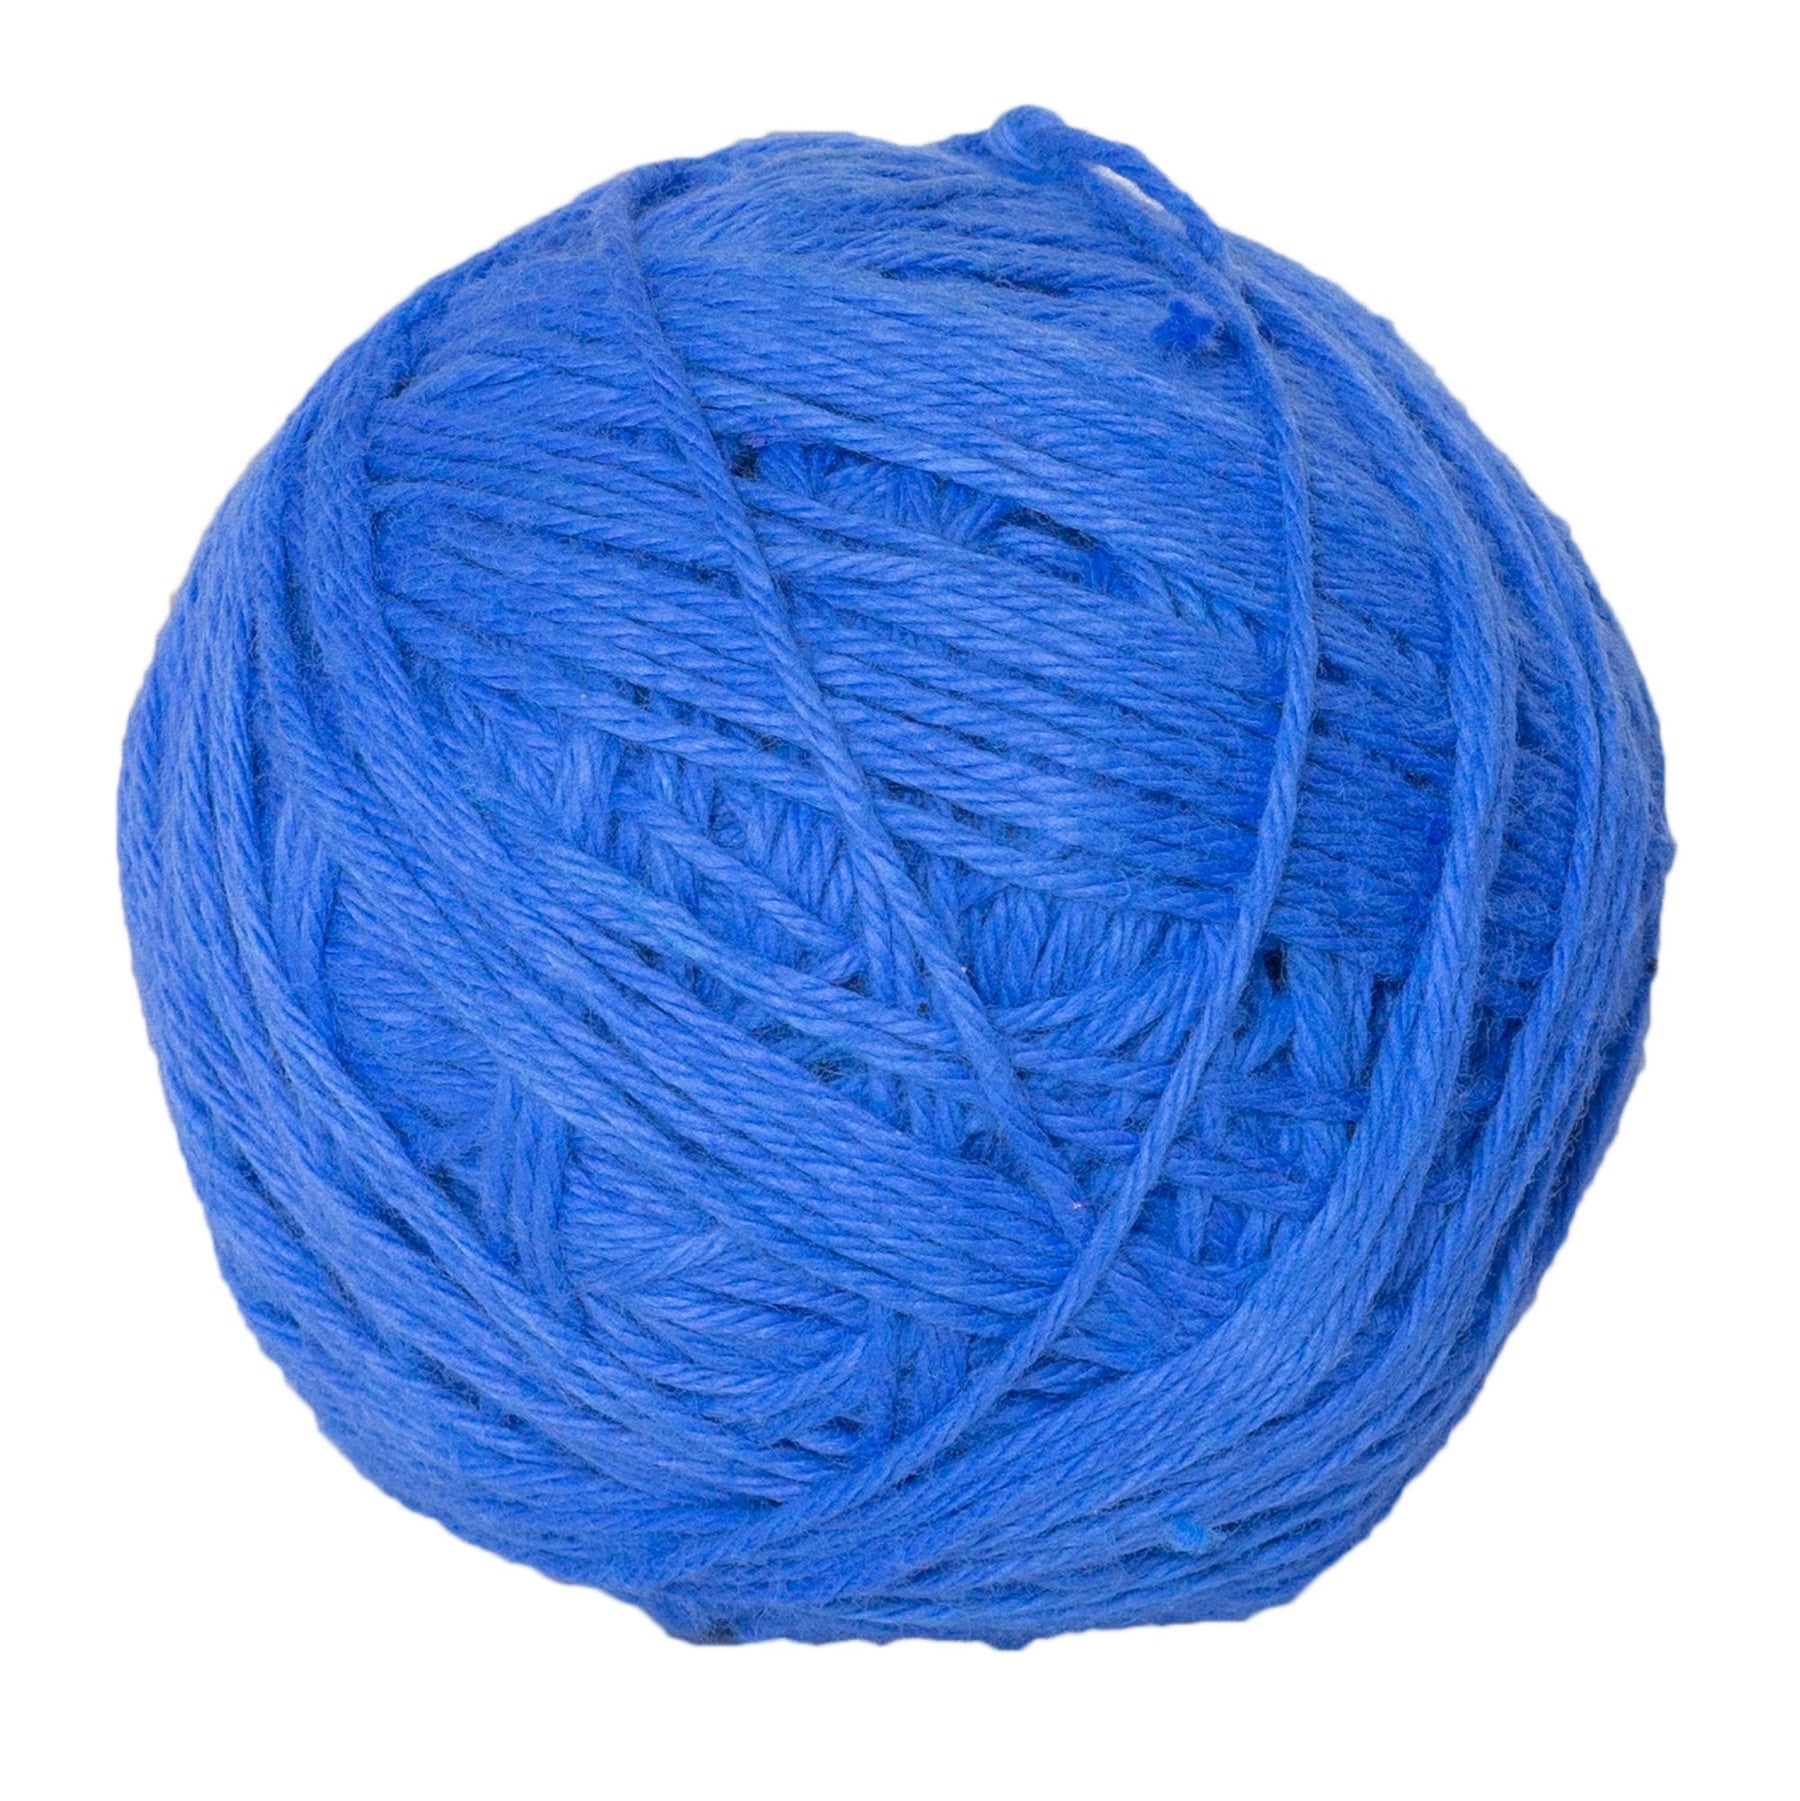 Blue Yarn Ball - Naturally Dyed Organic Cotton - assorted hues